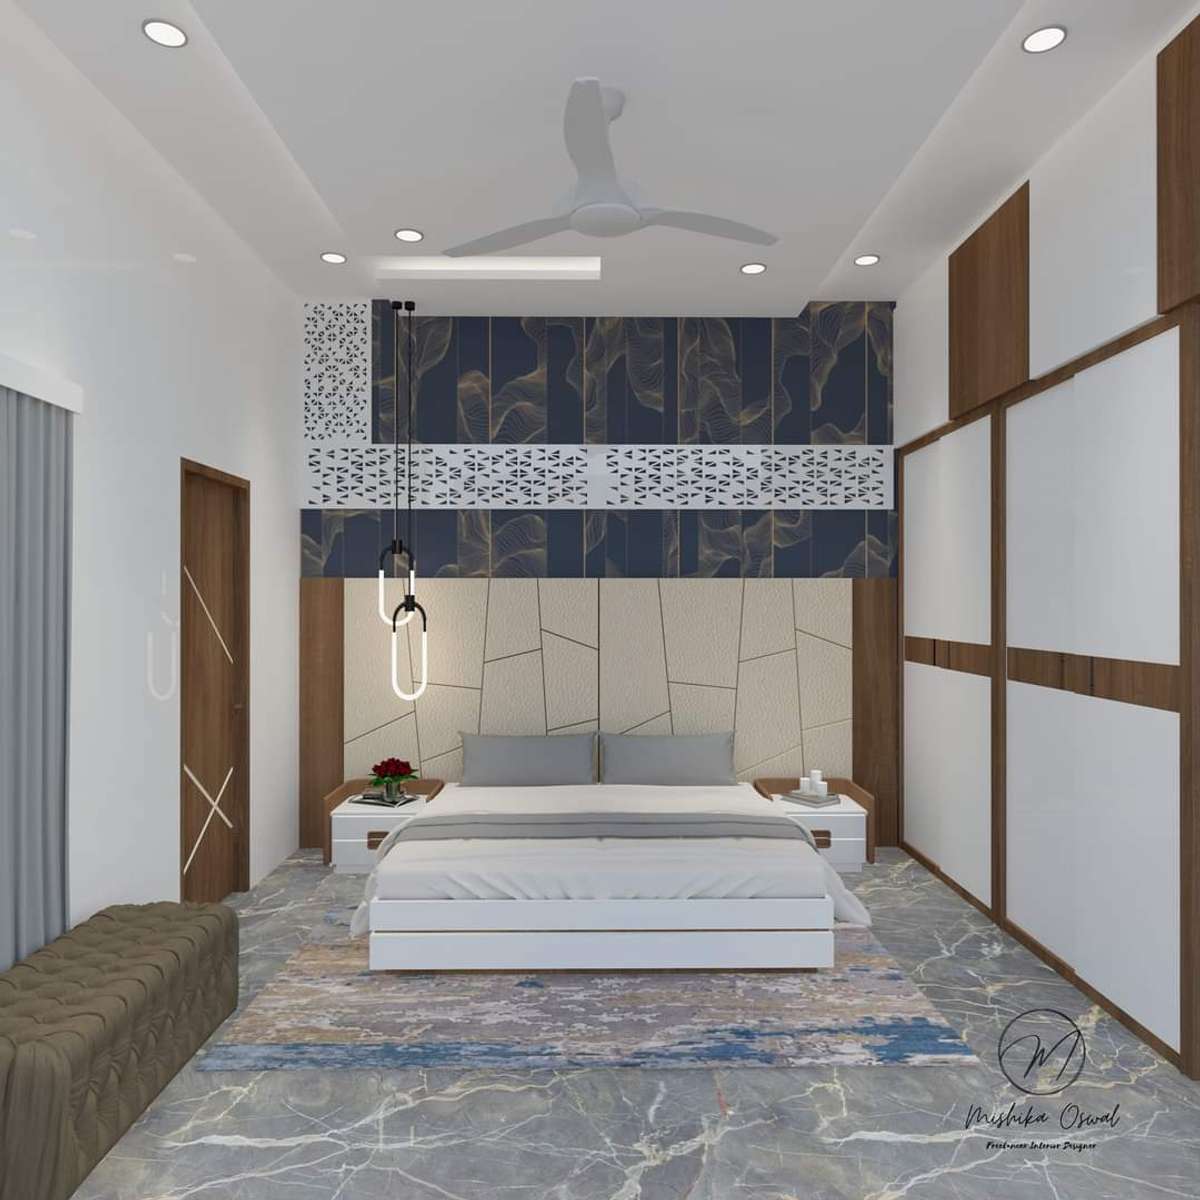 Interior 3d done by group of interior designer.
Contact for 3d Rendering and consultation At very minimal charges 
#homeinteriors #InteriorDesigner #HouseDesigns #3ddesigns